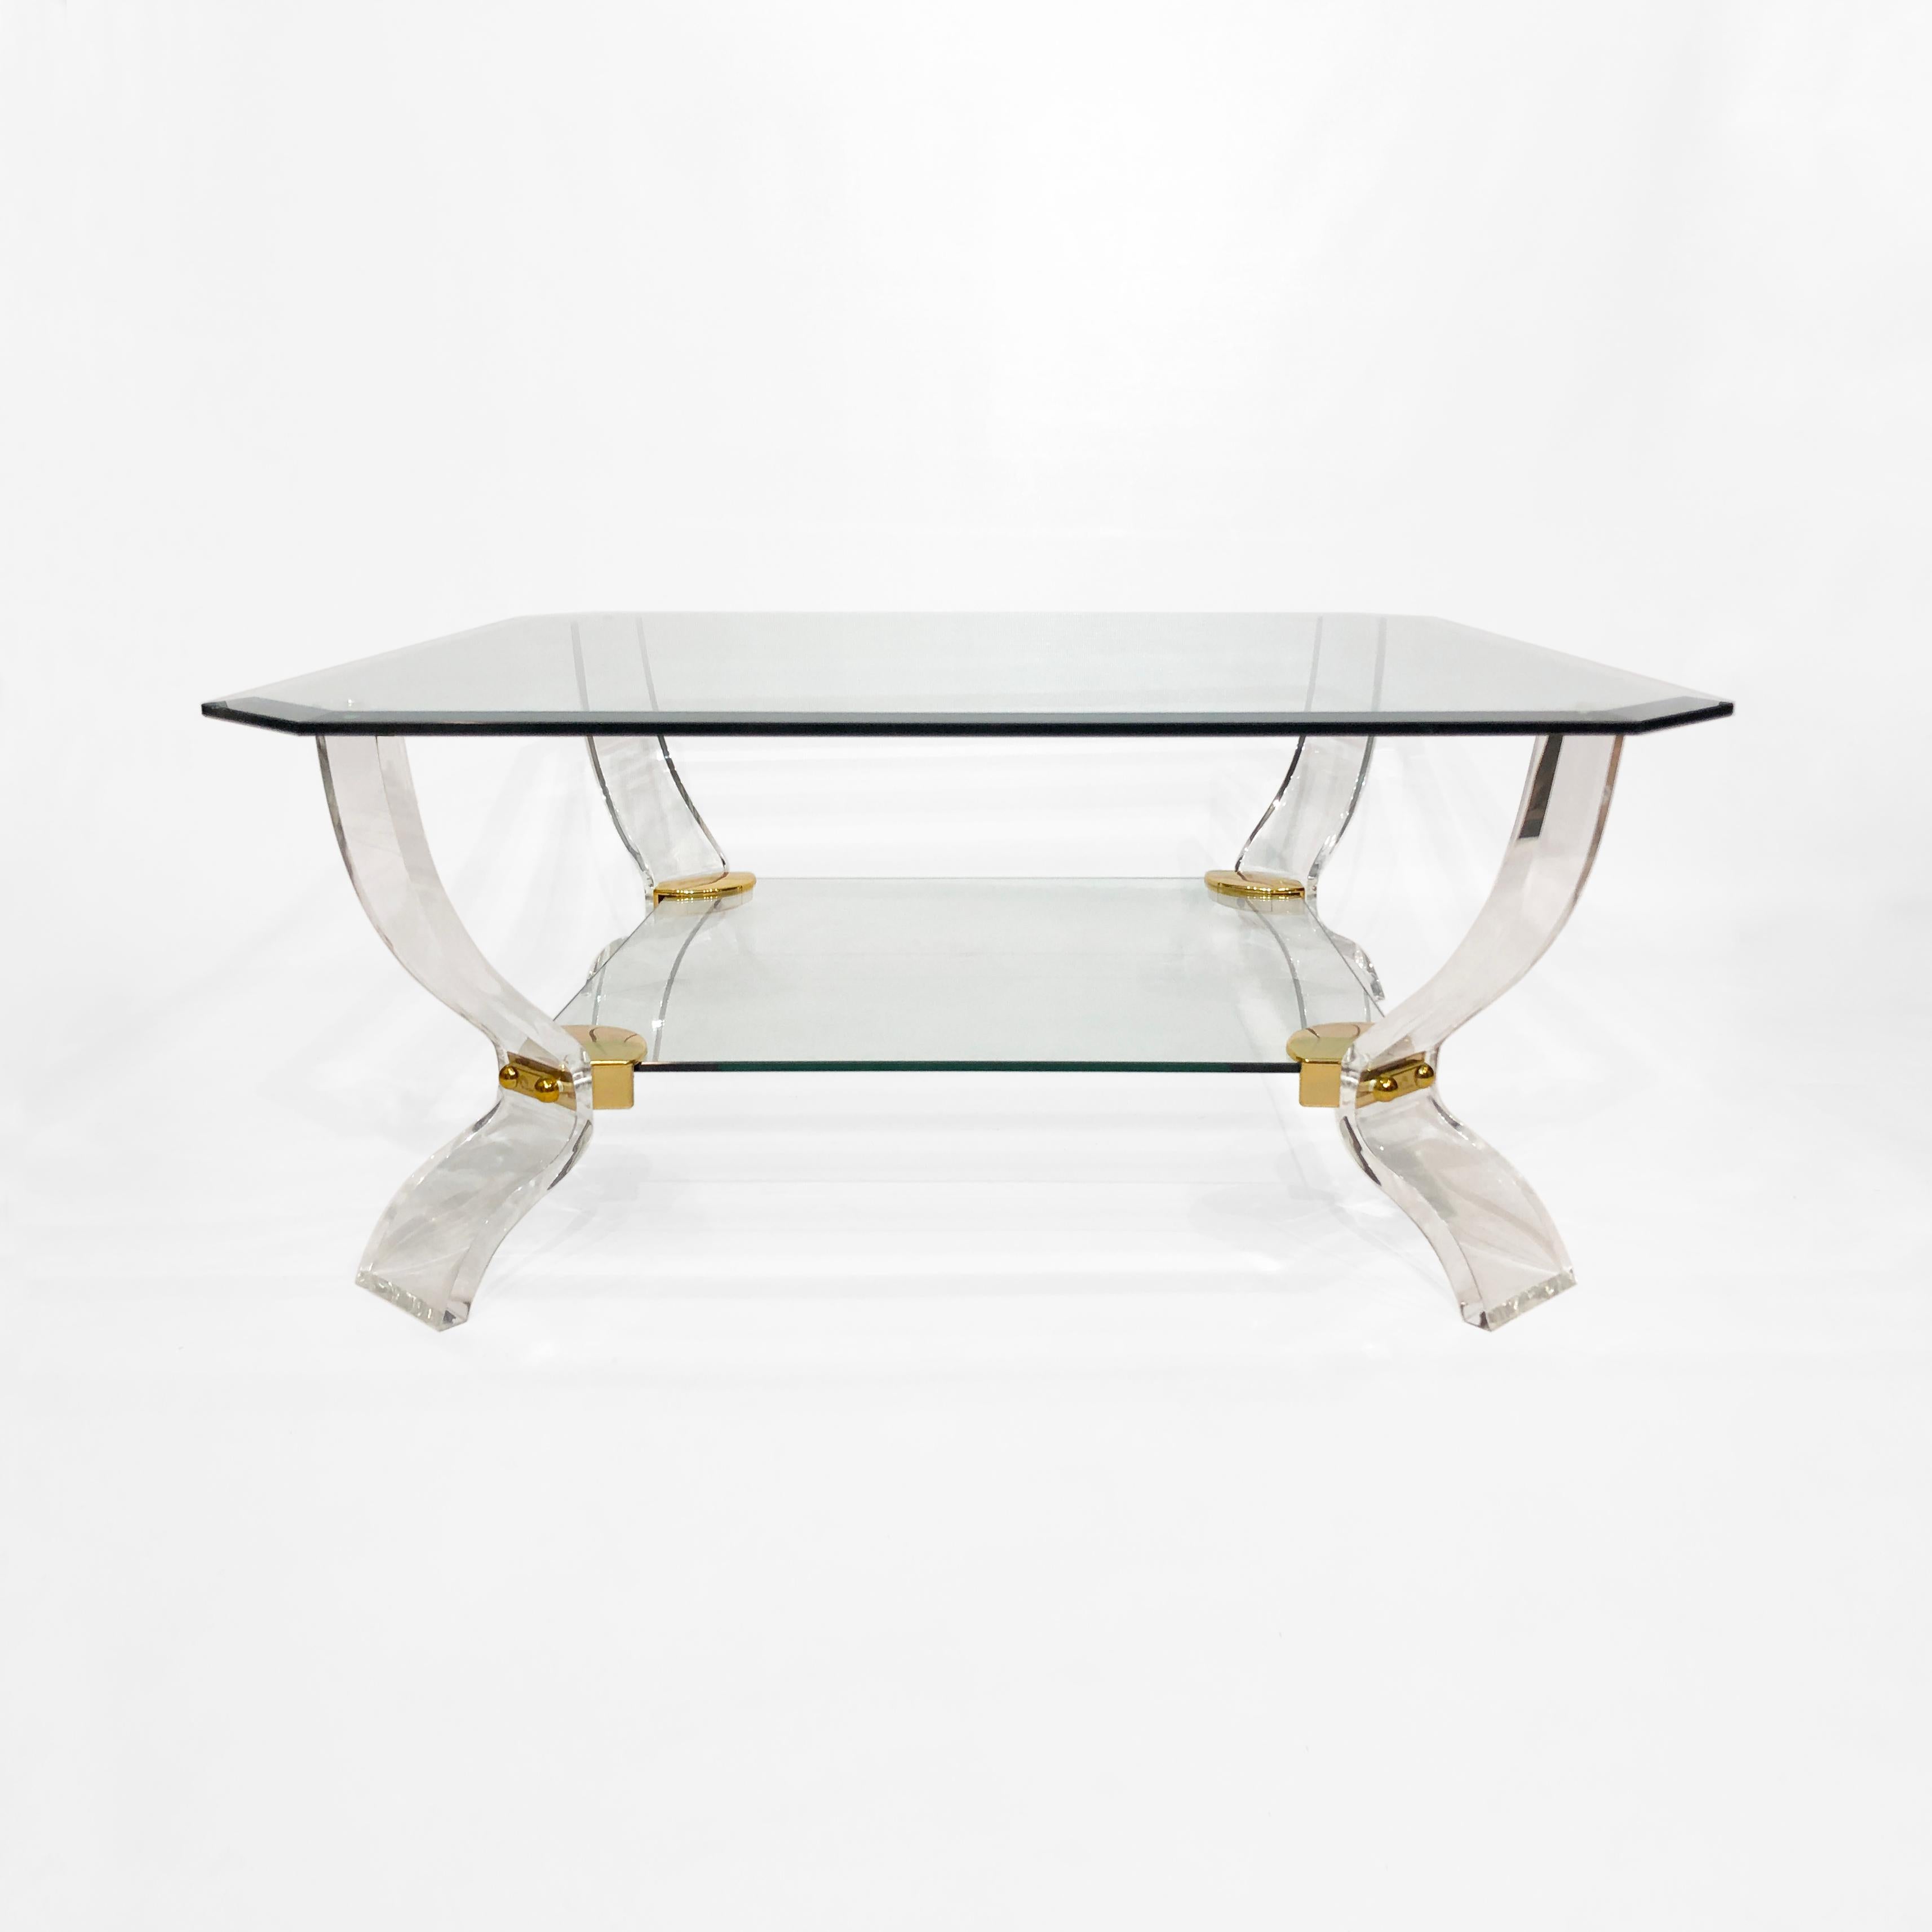 An elegant 1980s octagonal-square lucite and glass tiered coffee table by Curvasa Muebles, and very much in the style of Charles Hollis Jones. The thick octagonal bevelled glass top is supported on four hourglass-shaped lucite feet, with gold